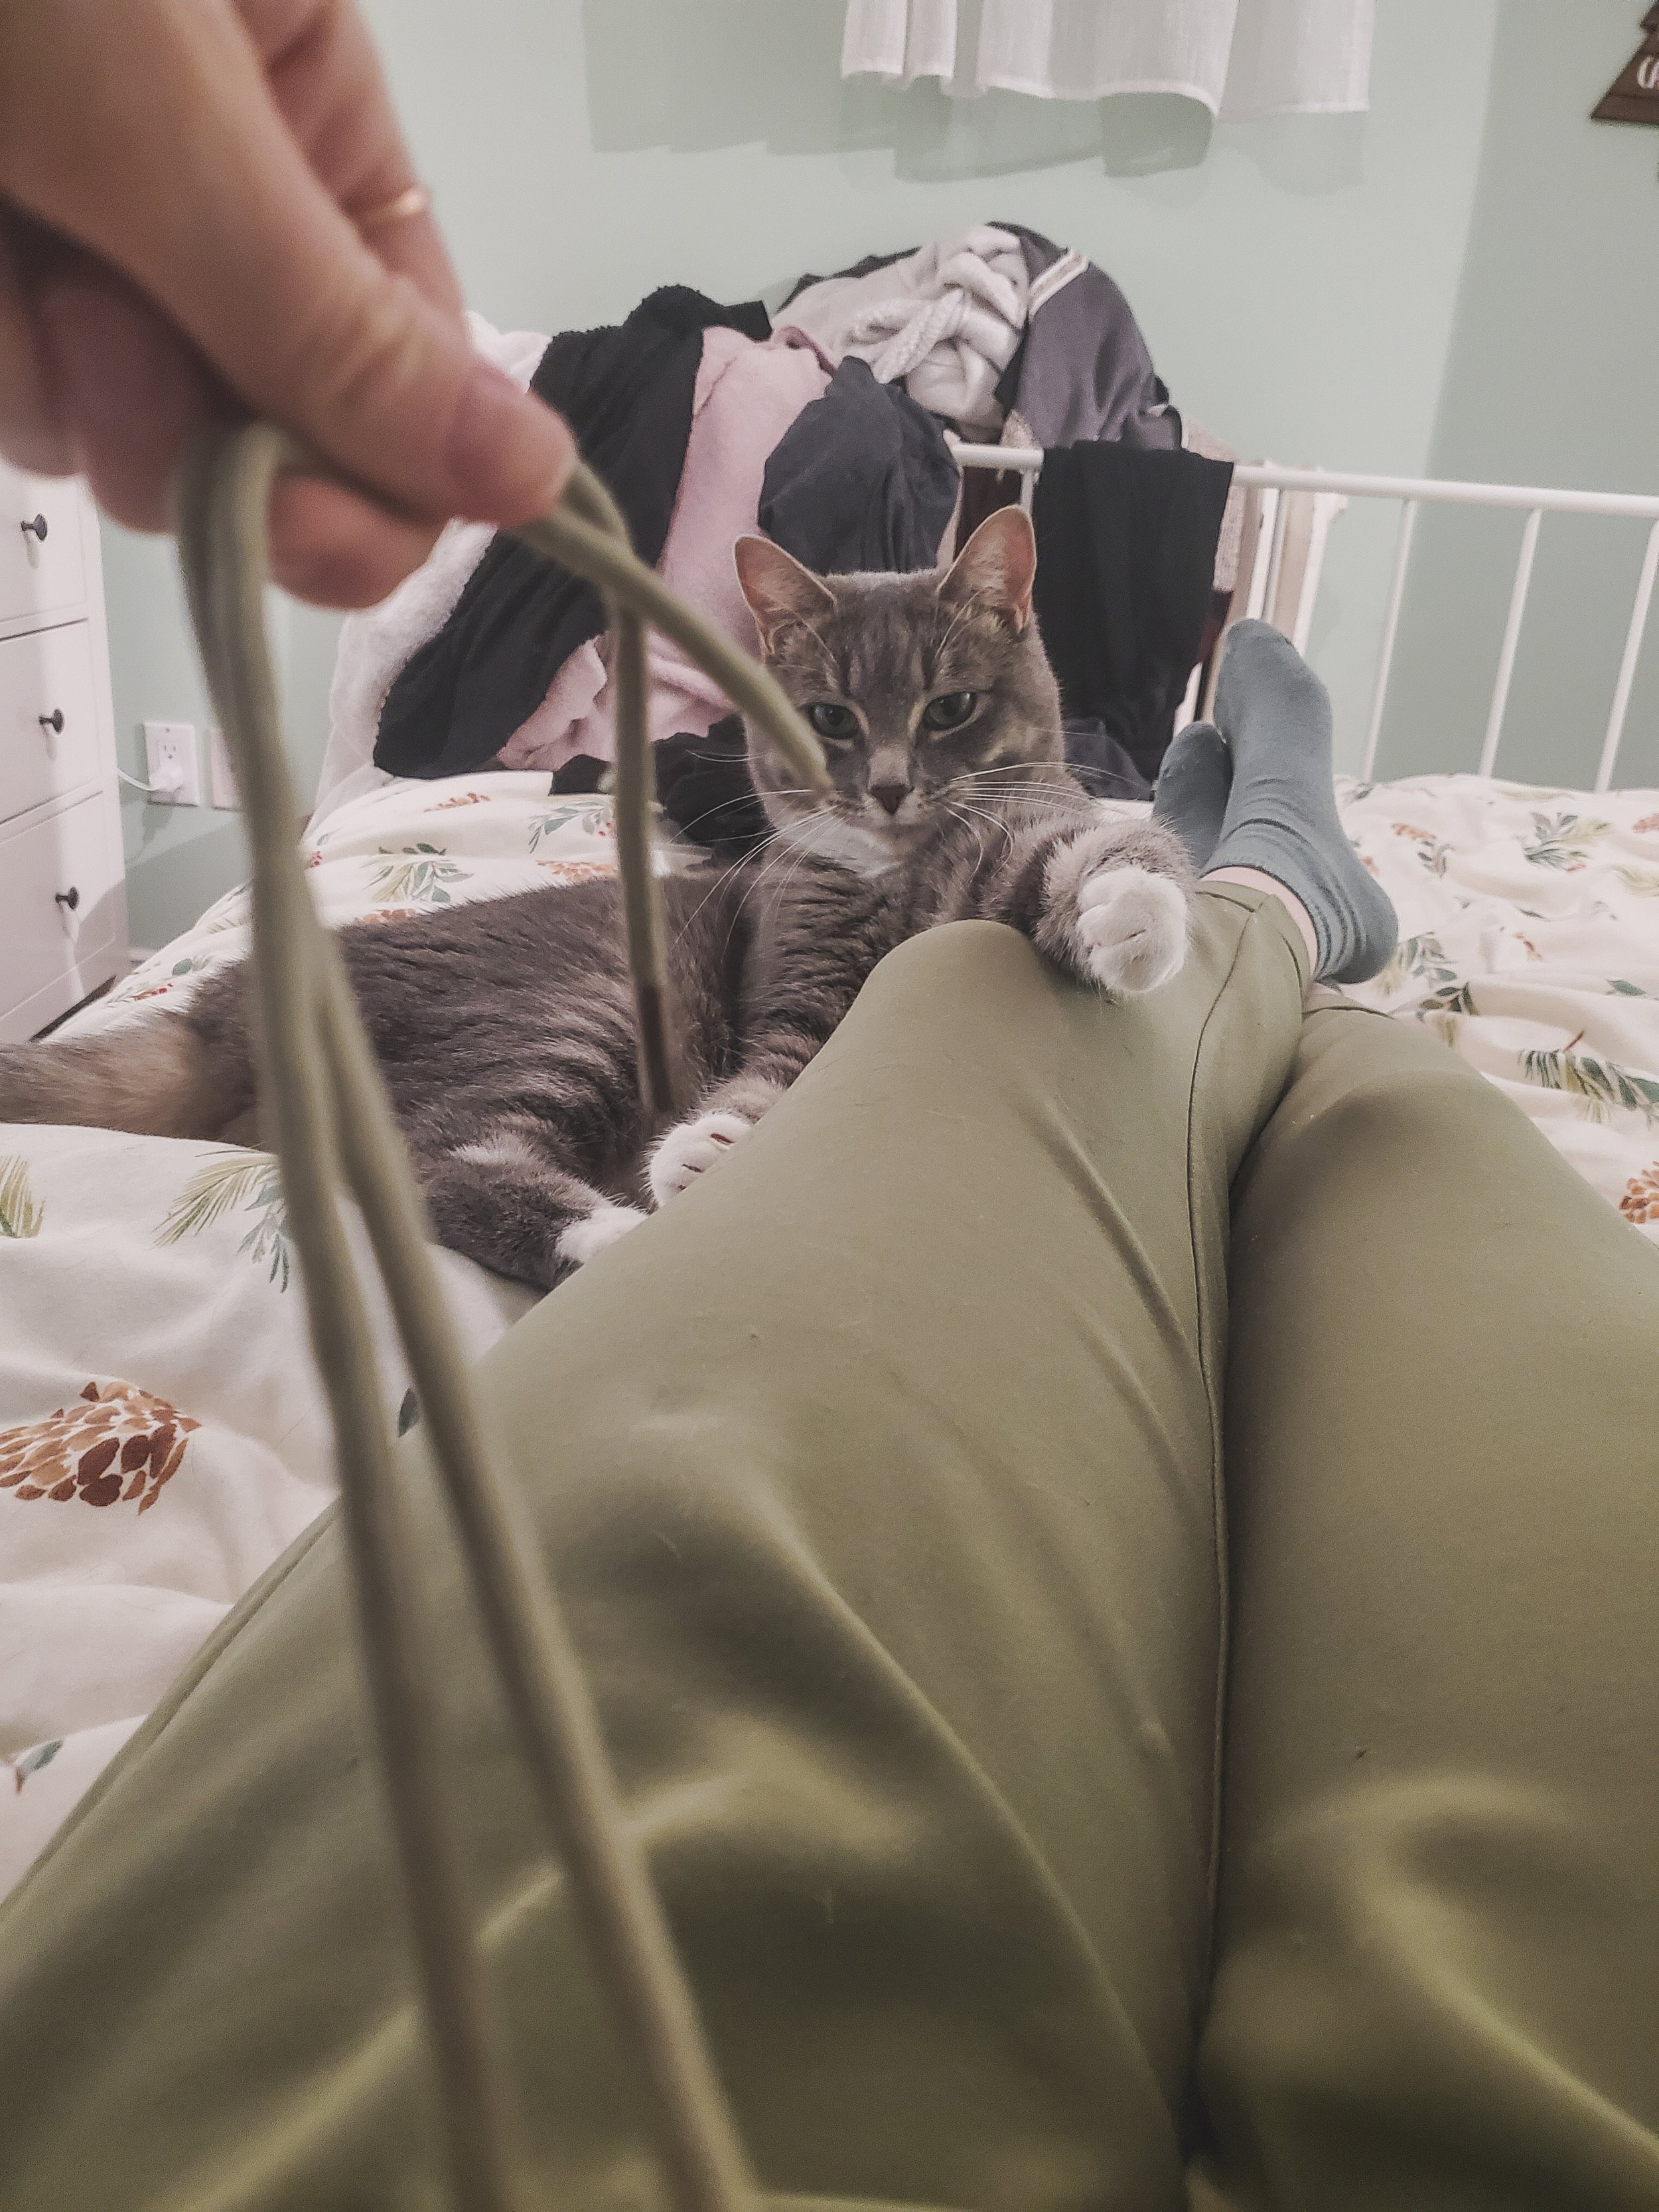  So desperate to play she’s playing with my pant strings. 